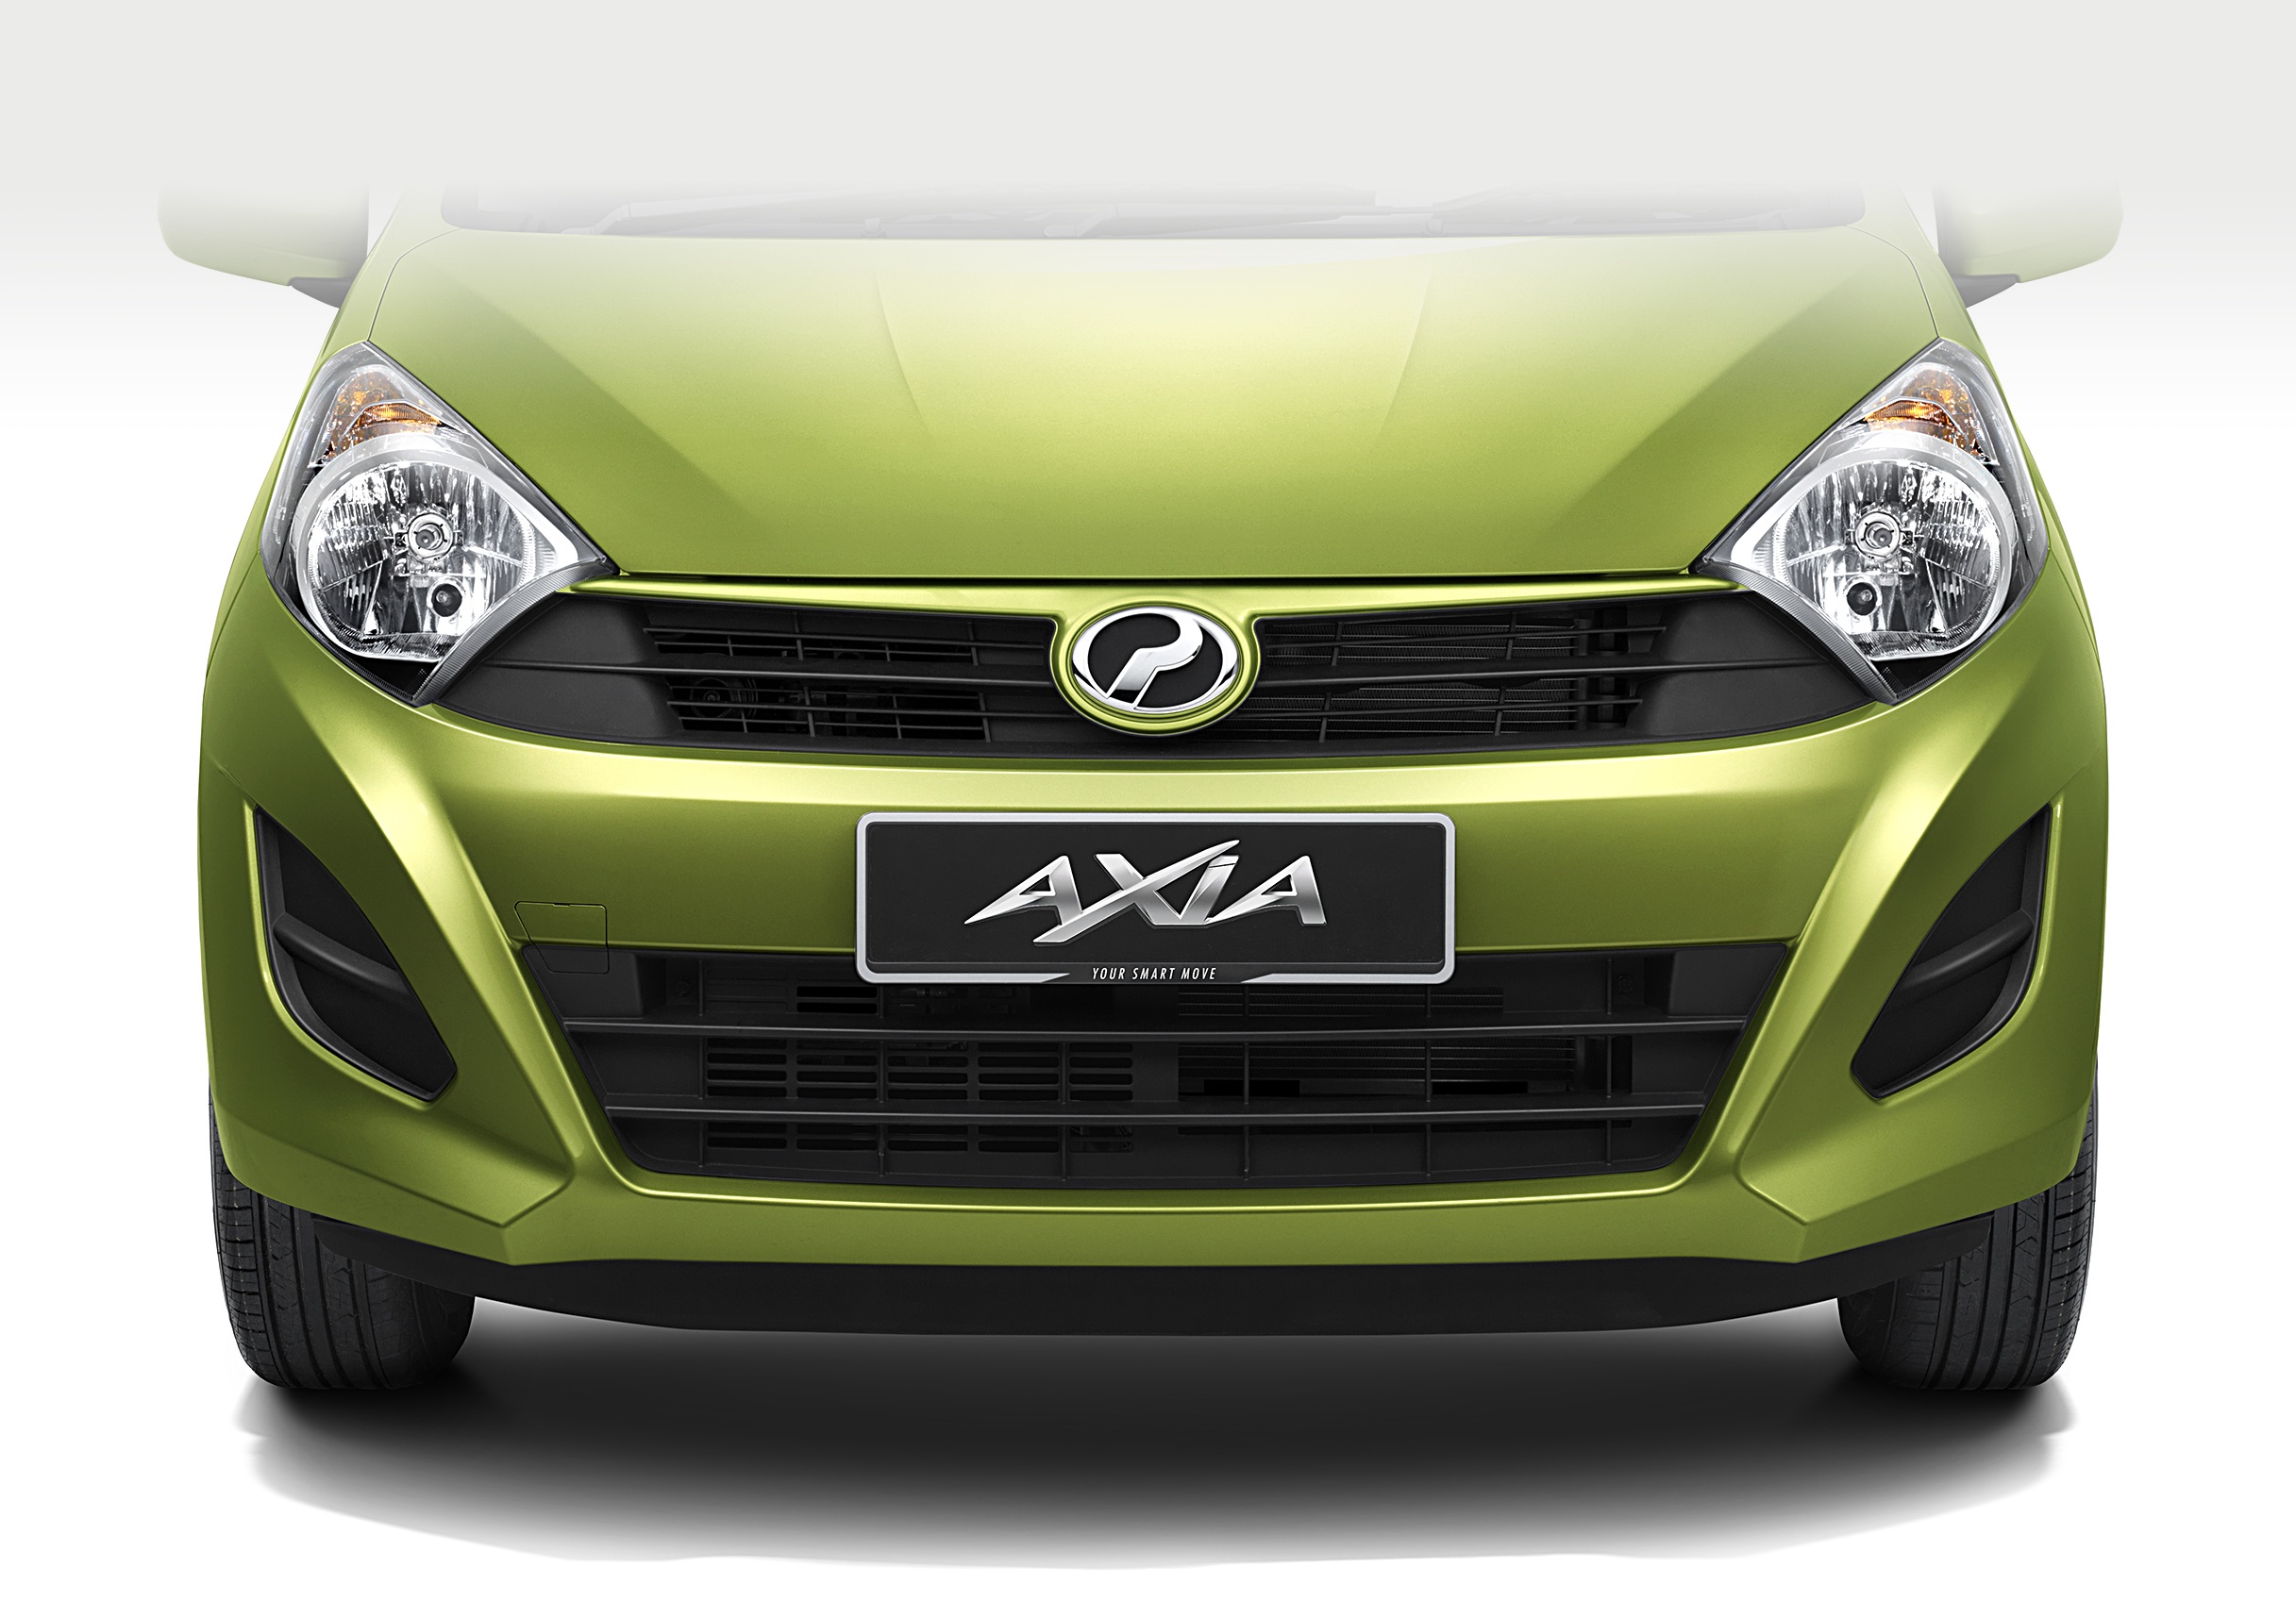 Perodua Axia - first official pic of Standard face released!